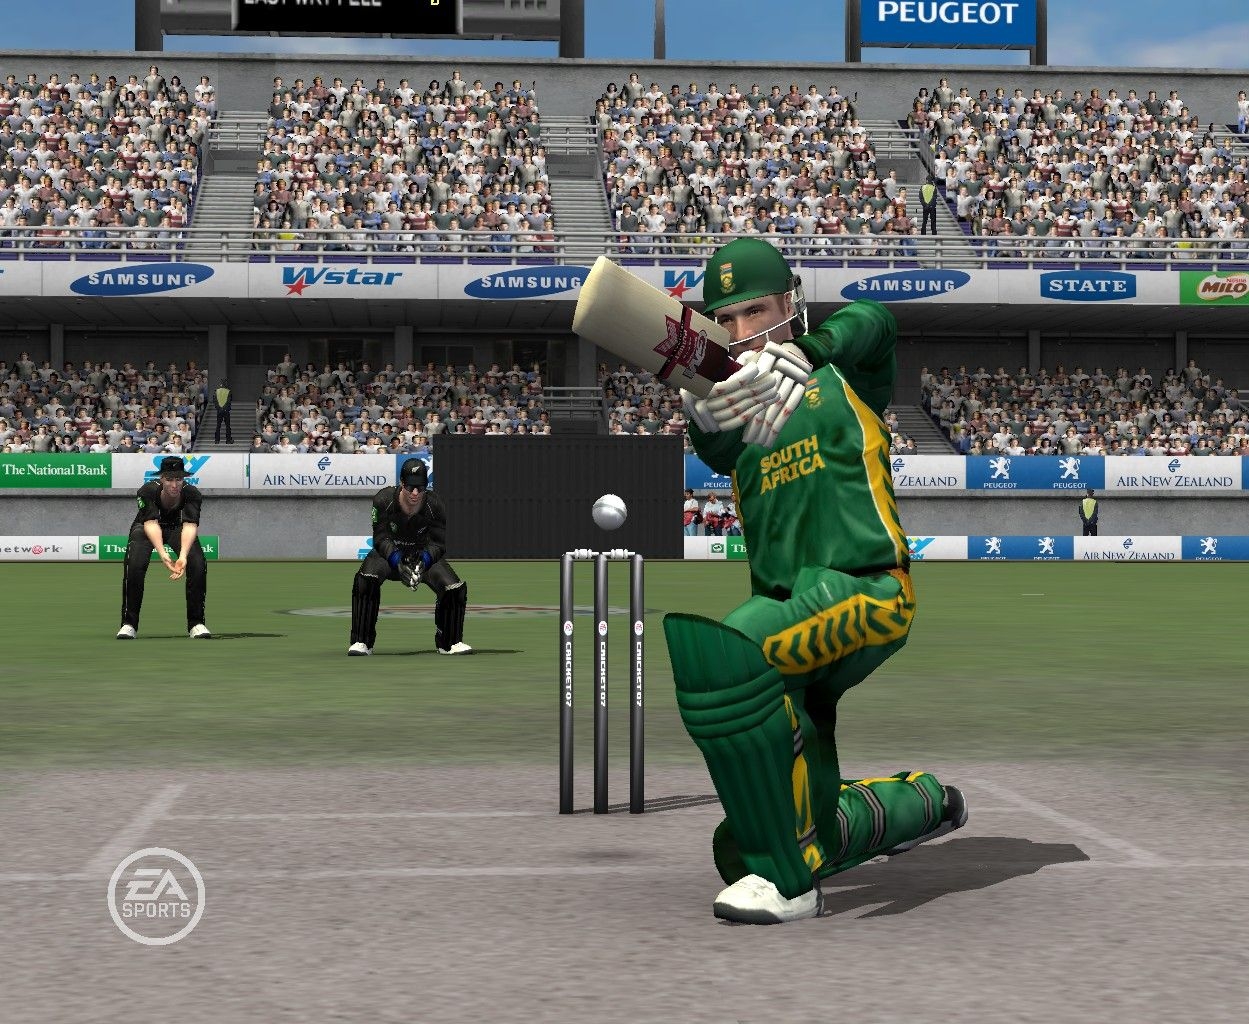 Cricket games 2010 free download utorrent for pc think and grow rich pdf kickasstorrents